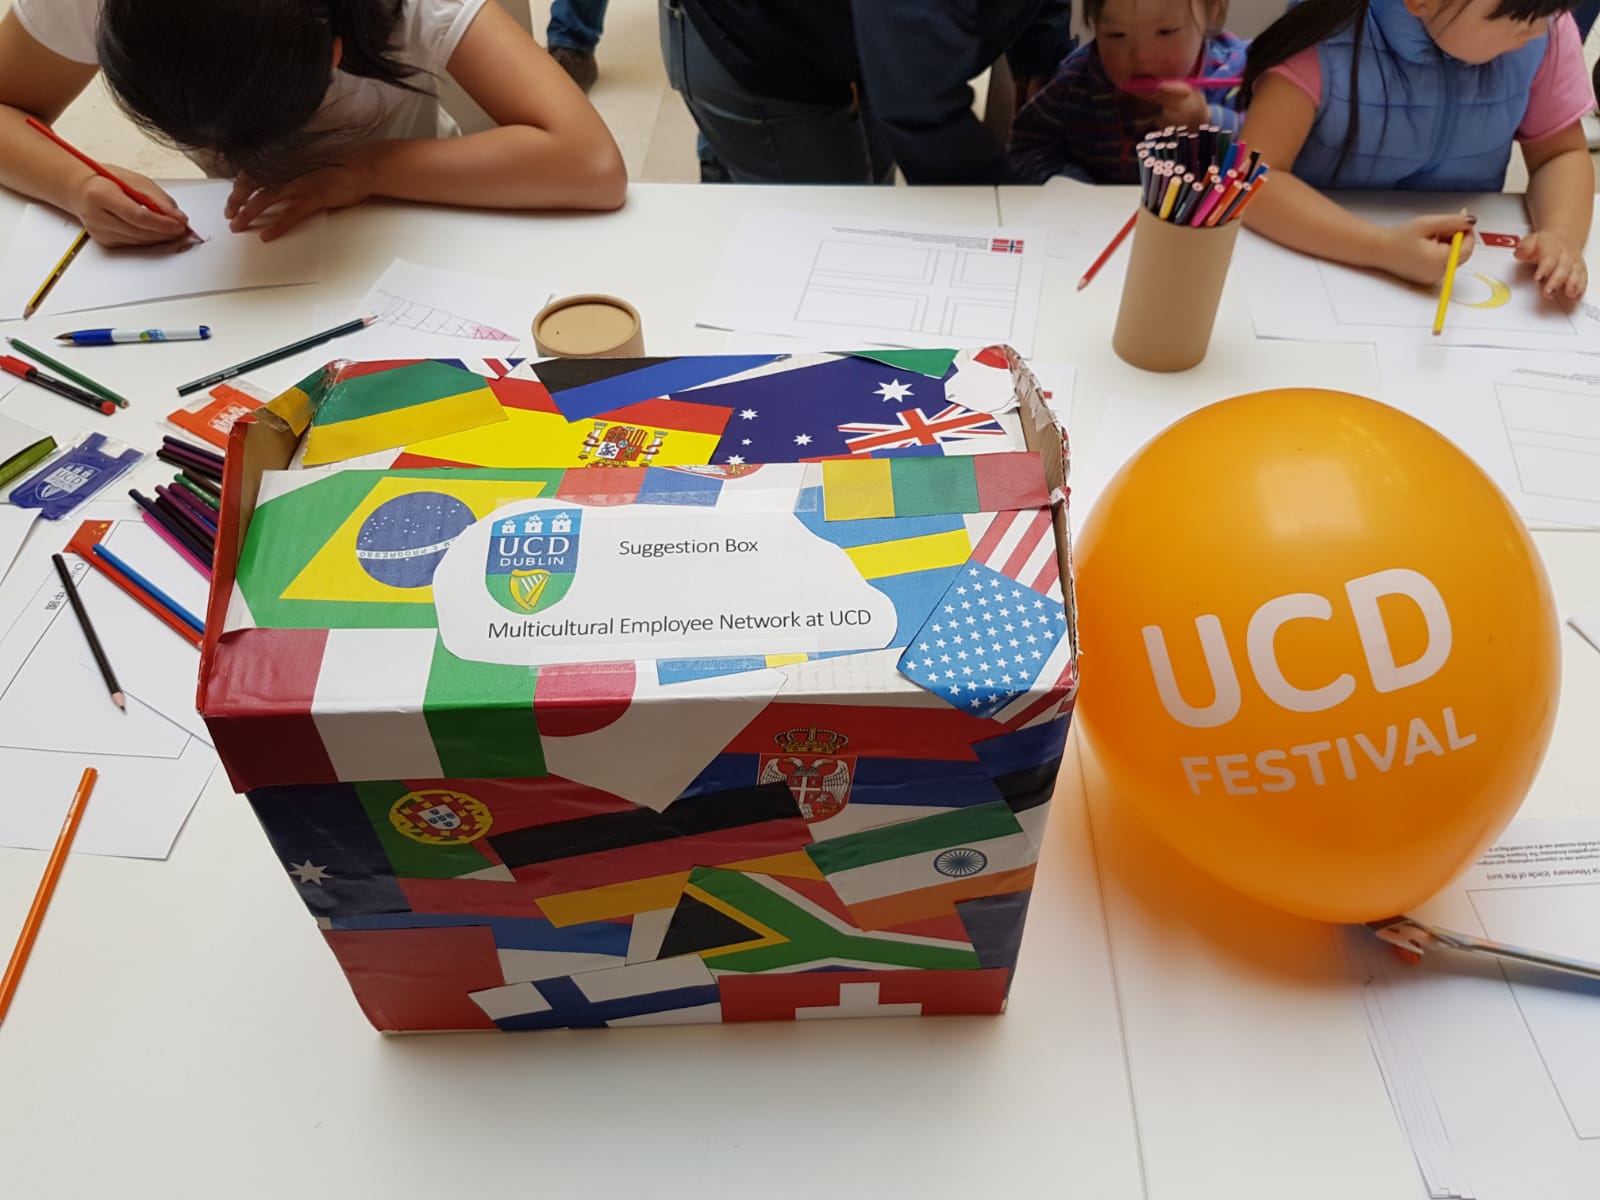 Find about all the events organised by the Multicultural Employee Network of UCD.